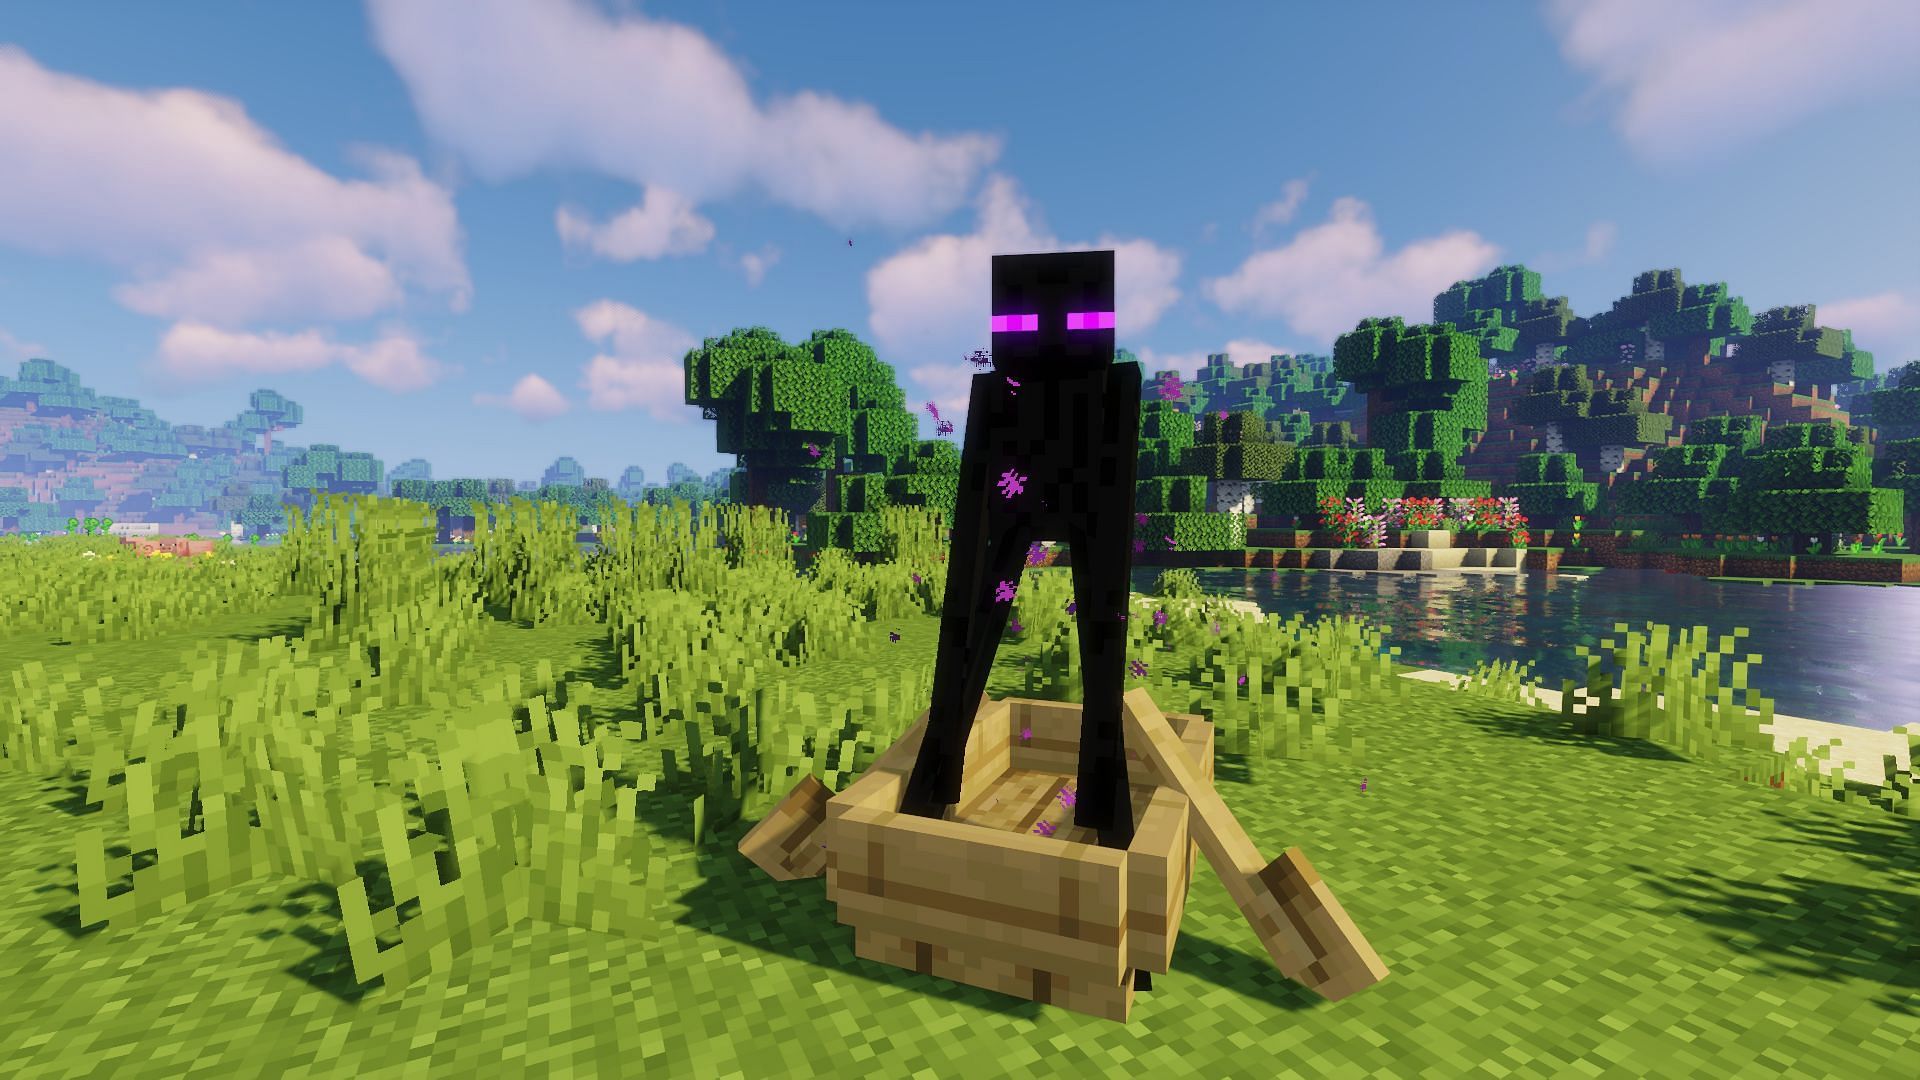 An enderman, one of Minecraft